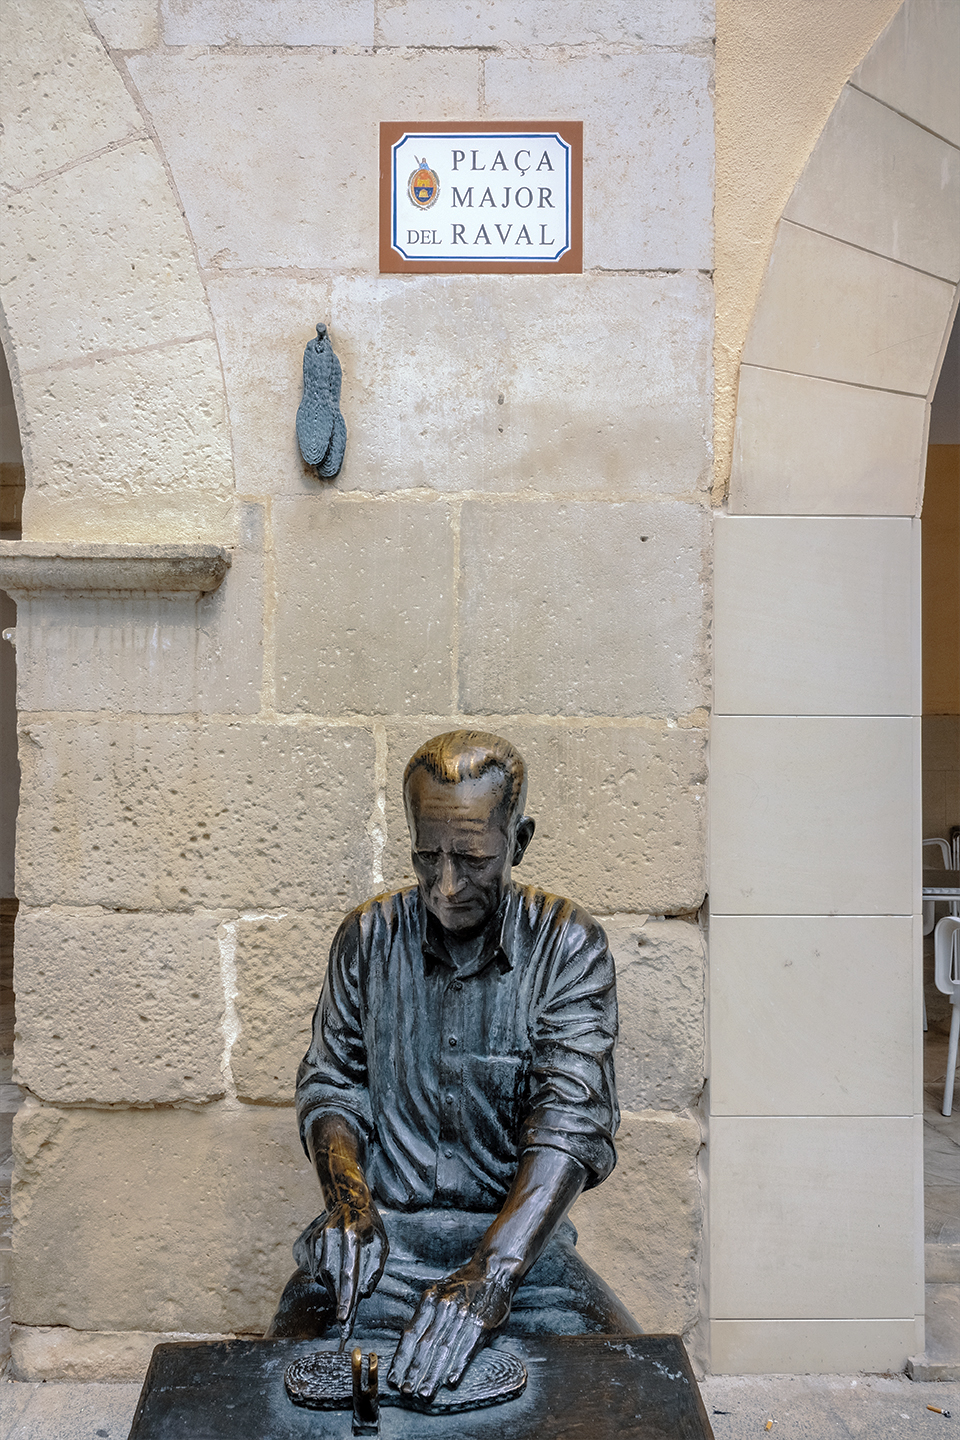 Image of the statue of a shoemaker in the Plaza Mayor of Elche.